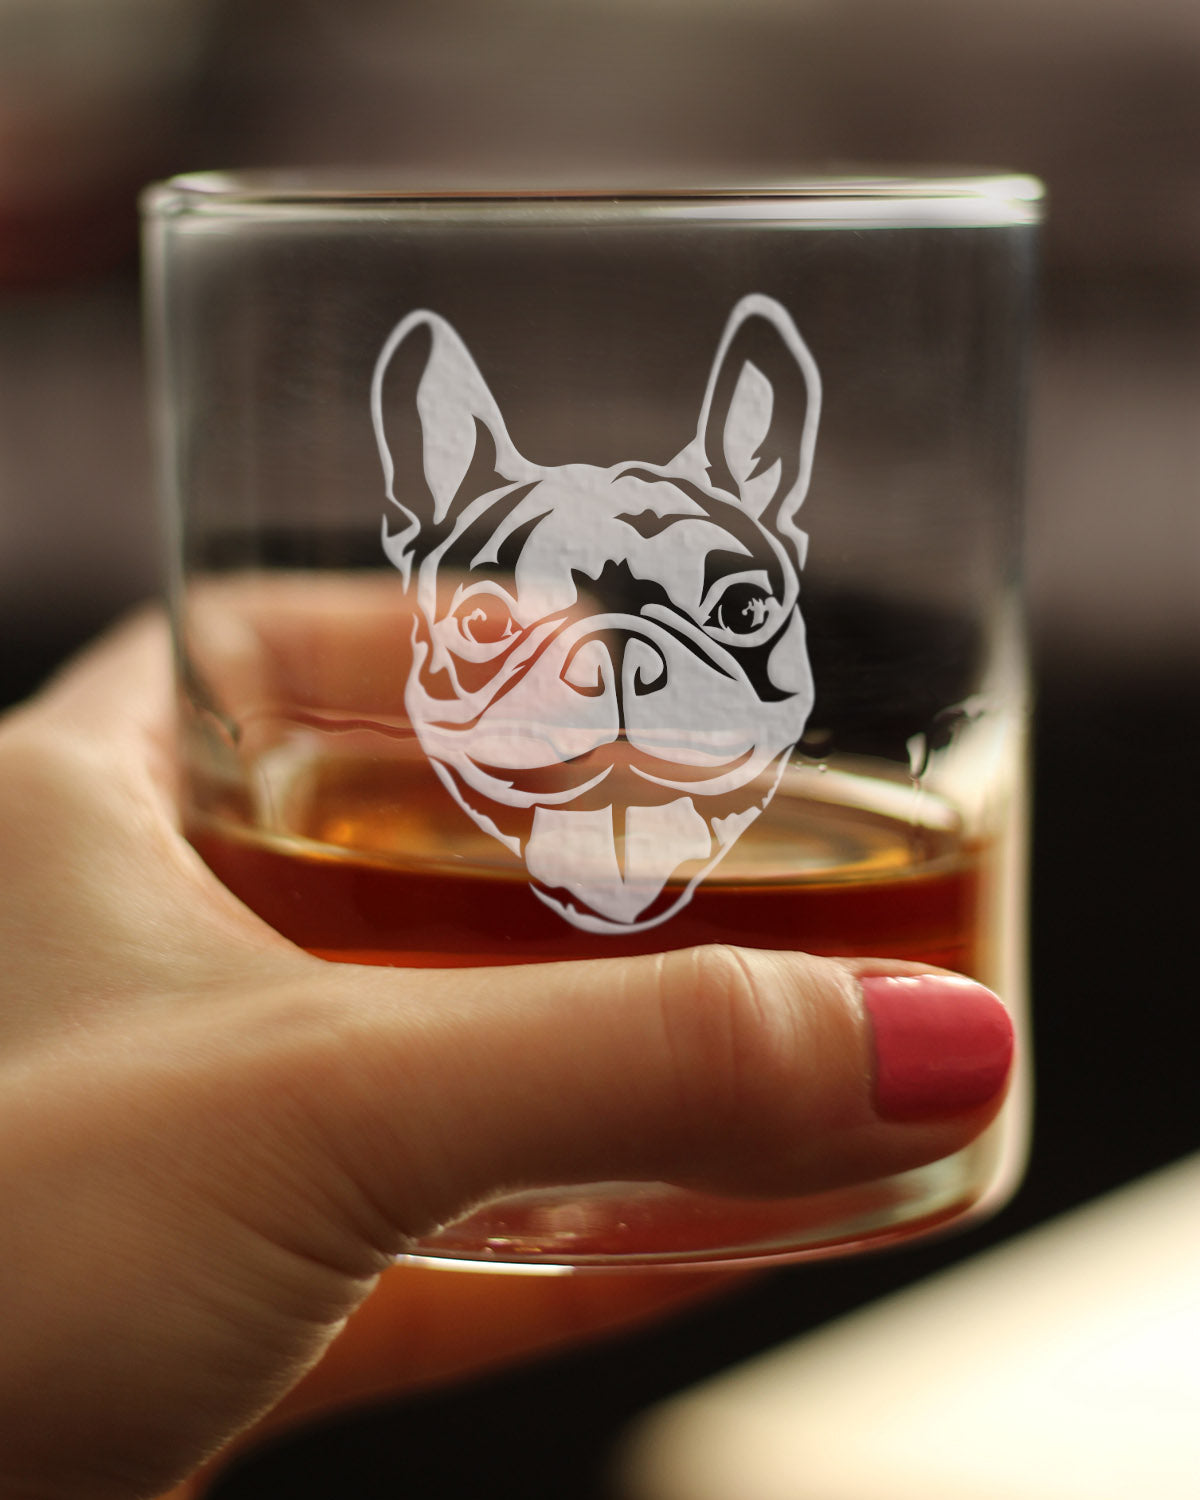 Happy Frenchie - Whiskey Rocks Glass - Unique French Bulldog Themed Gifts or Party Decor for Women and Men - 10.25 Oz